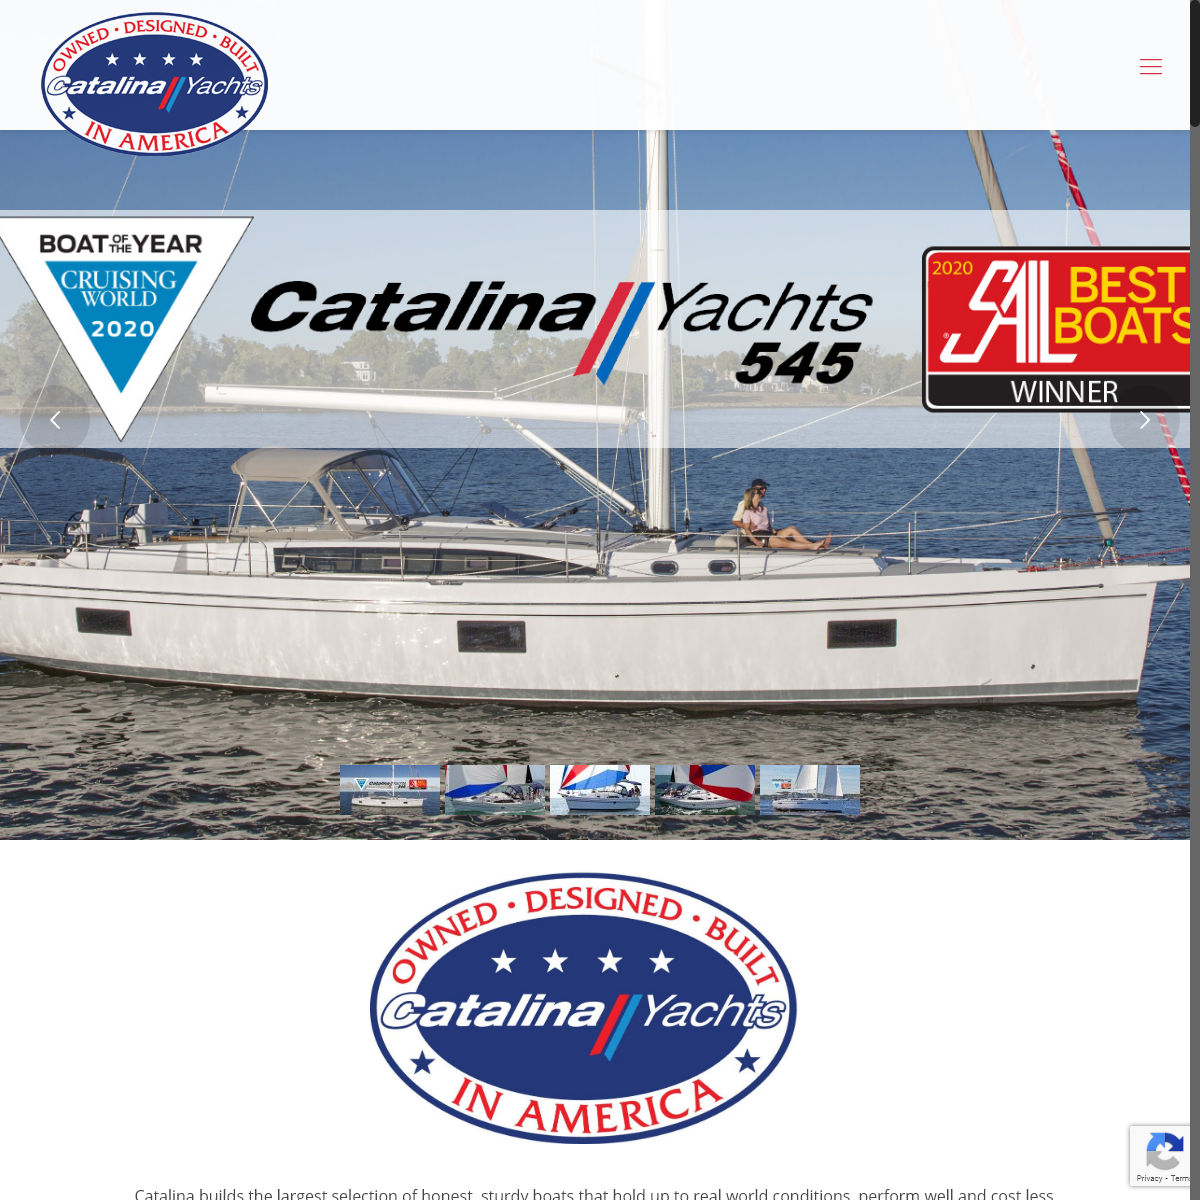 A complete backup of catalinayachts.com